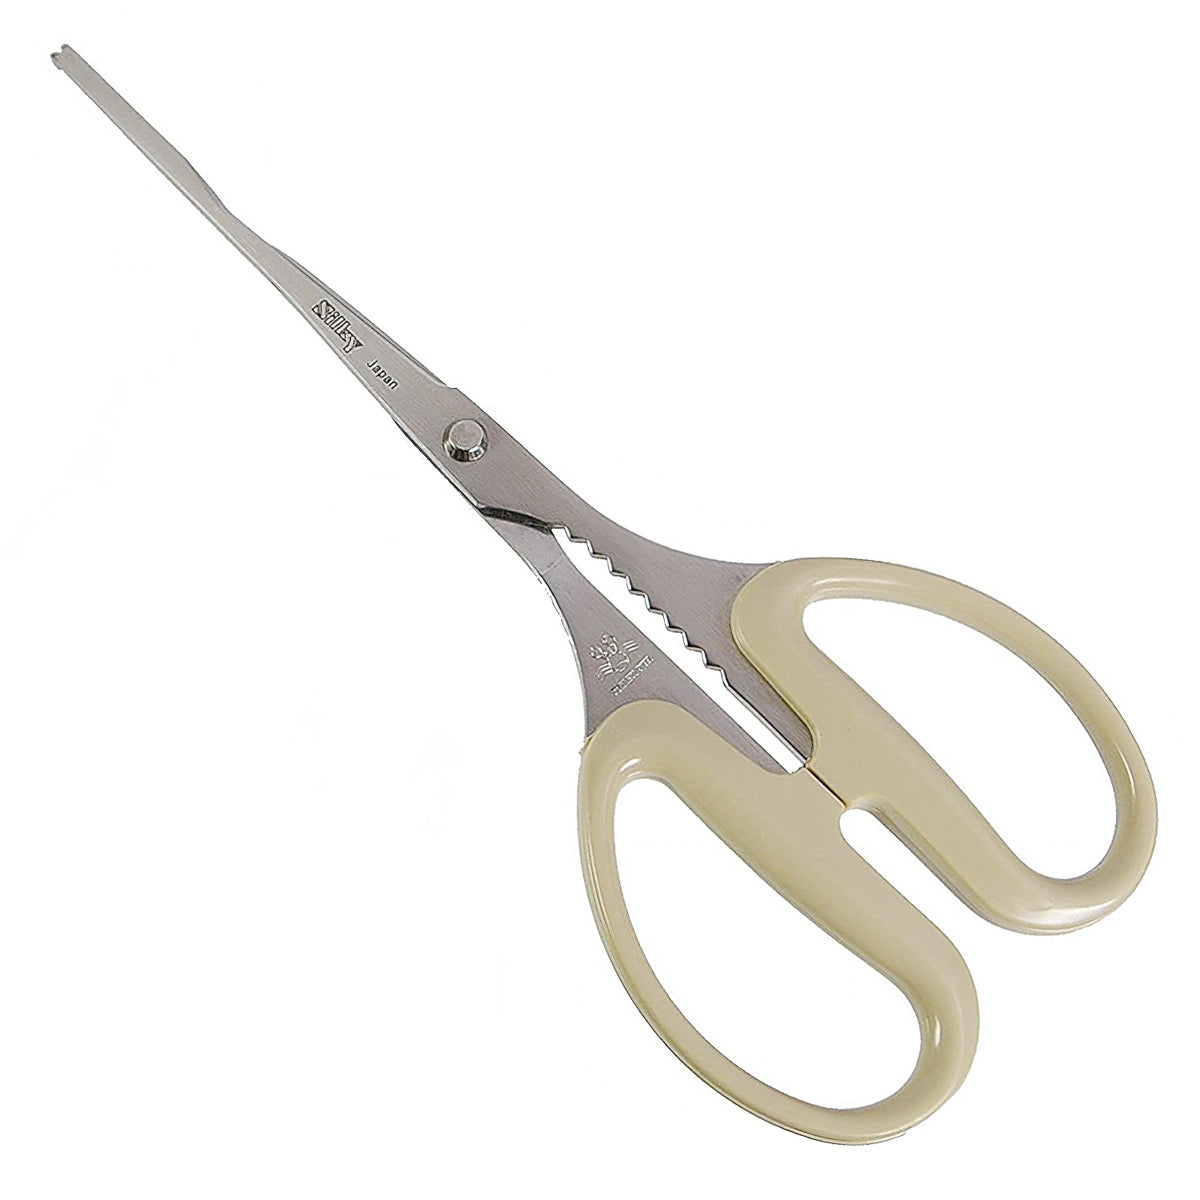 Marusho SILKY Stainless Steel White Crab Cutter Seafood Scissors